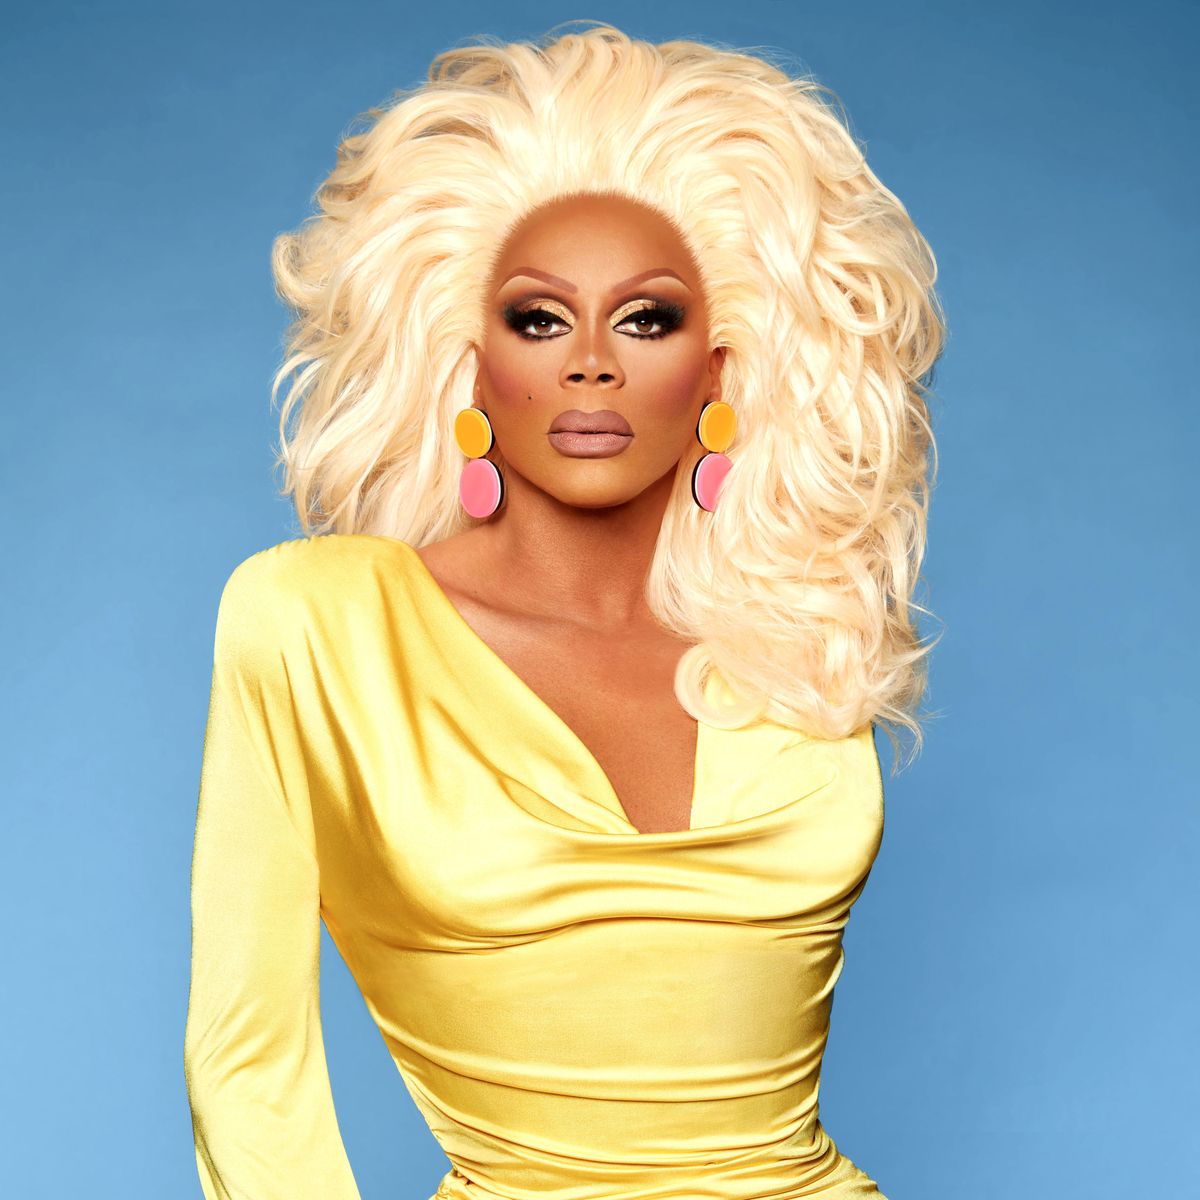 Why Is Rupaul Missing In Drag Race Uk'S Latest Season 4 Episode?